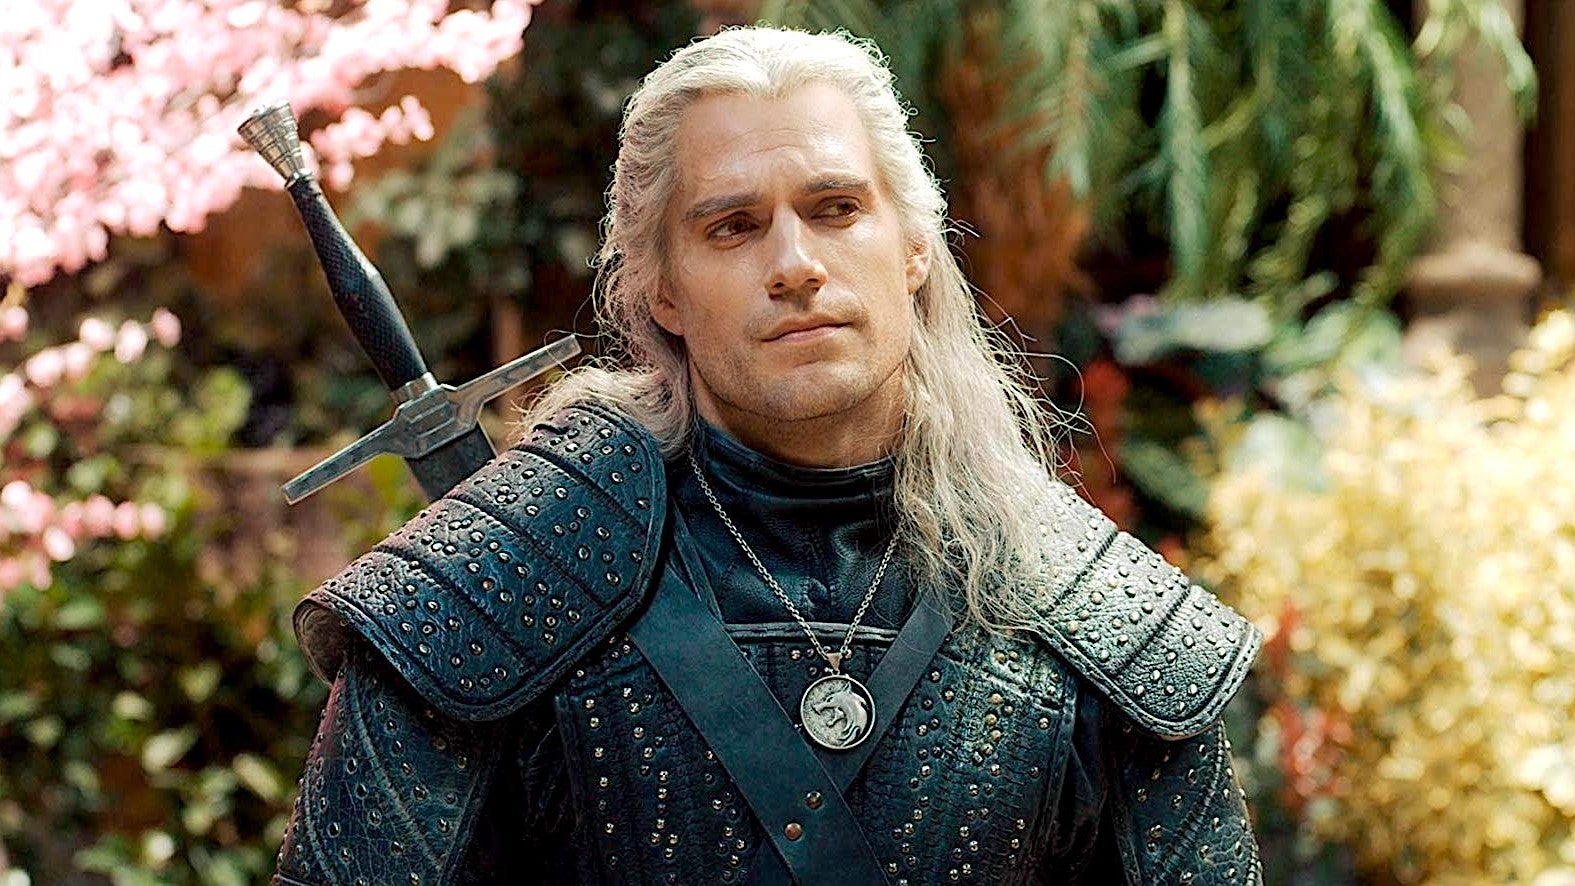 Image for The Witcher Season 3 gives Henry Cavill's Geralt a "heroic sendoff", showrunner says